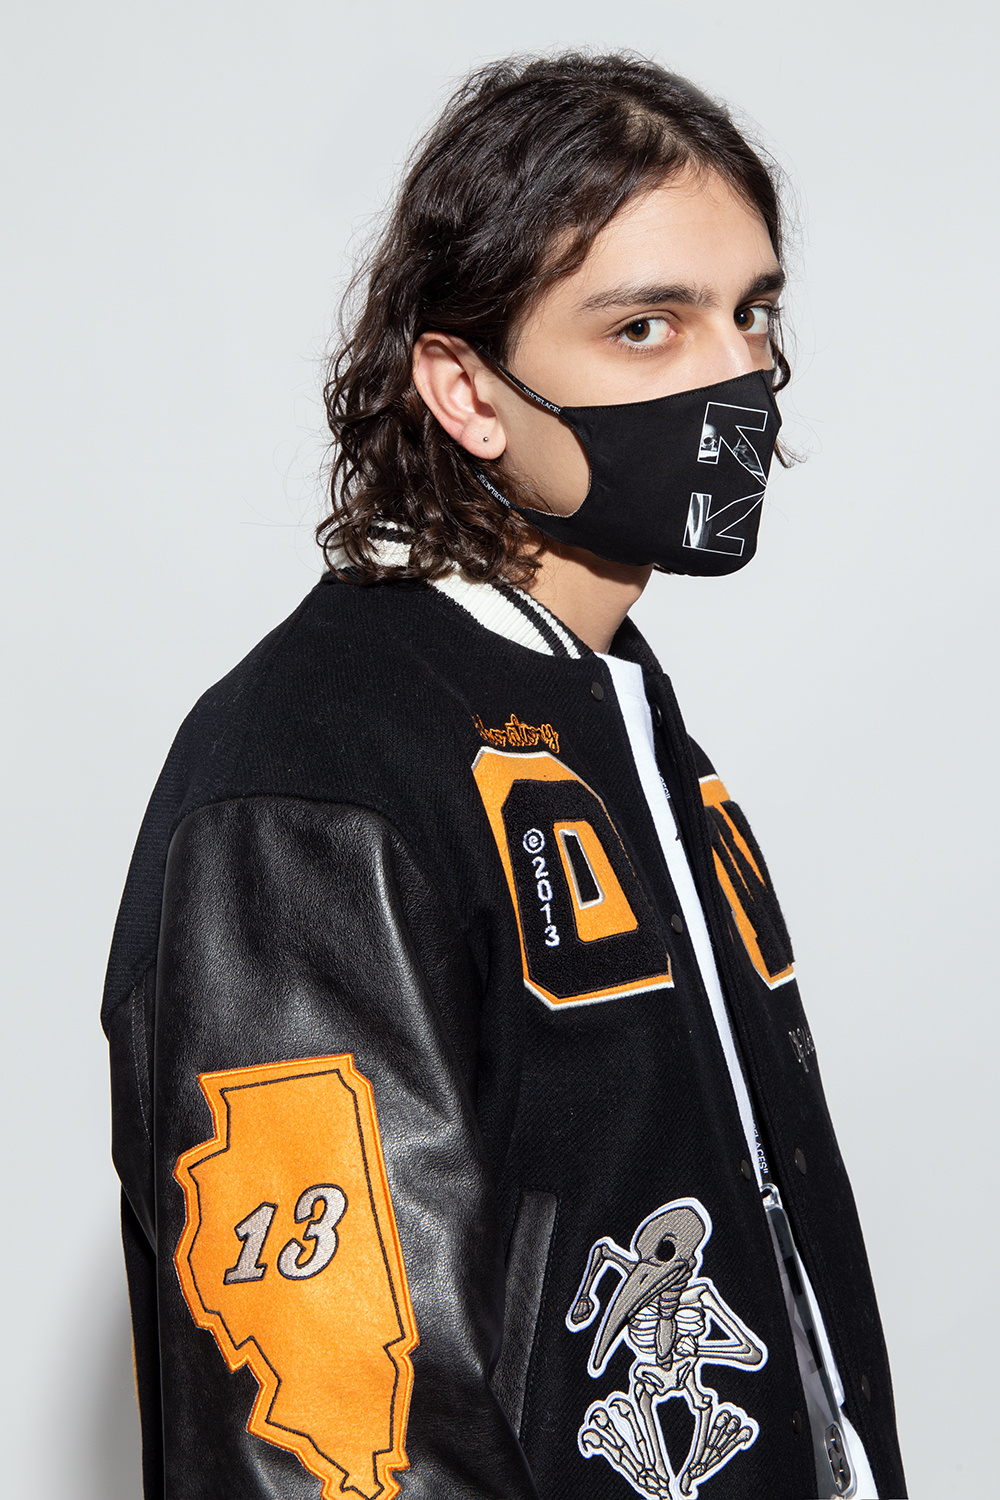 Off-White This mask also features a unique new 3-D contoured mask strap that prevents folding or hair pulling